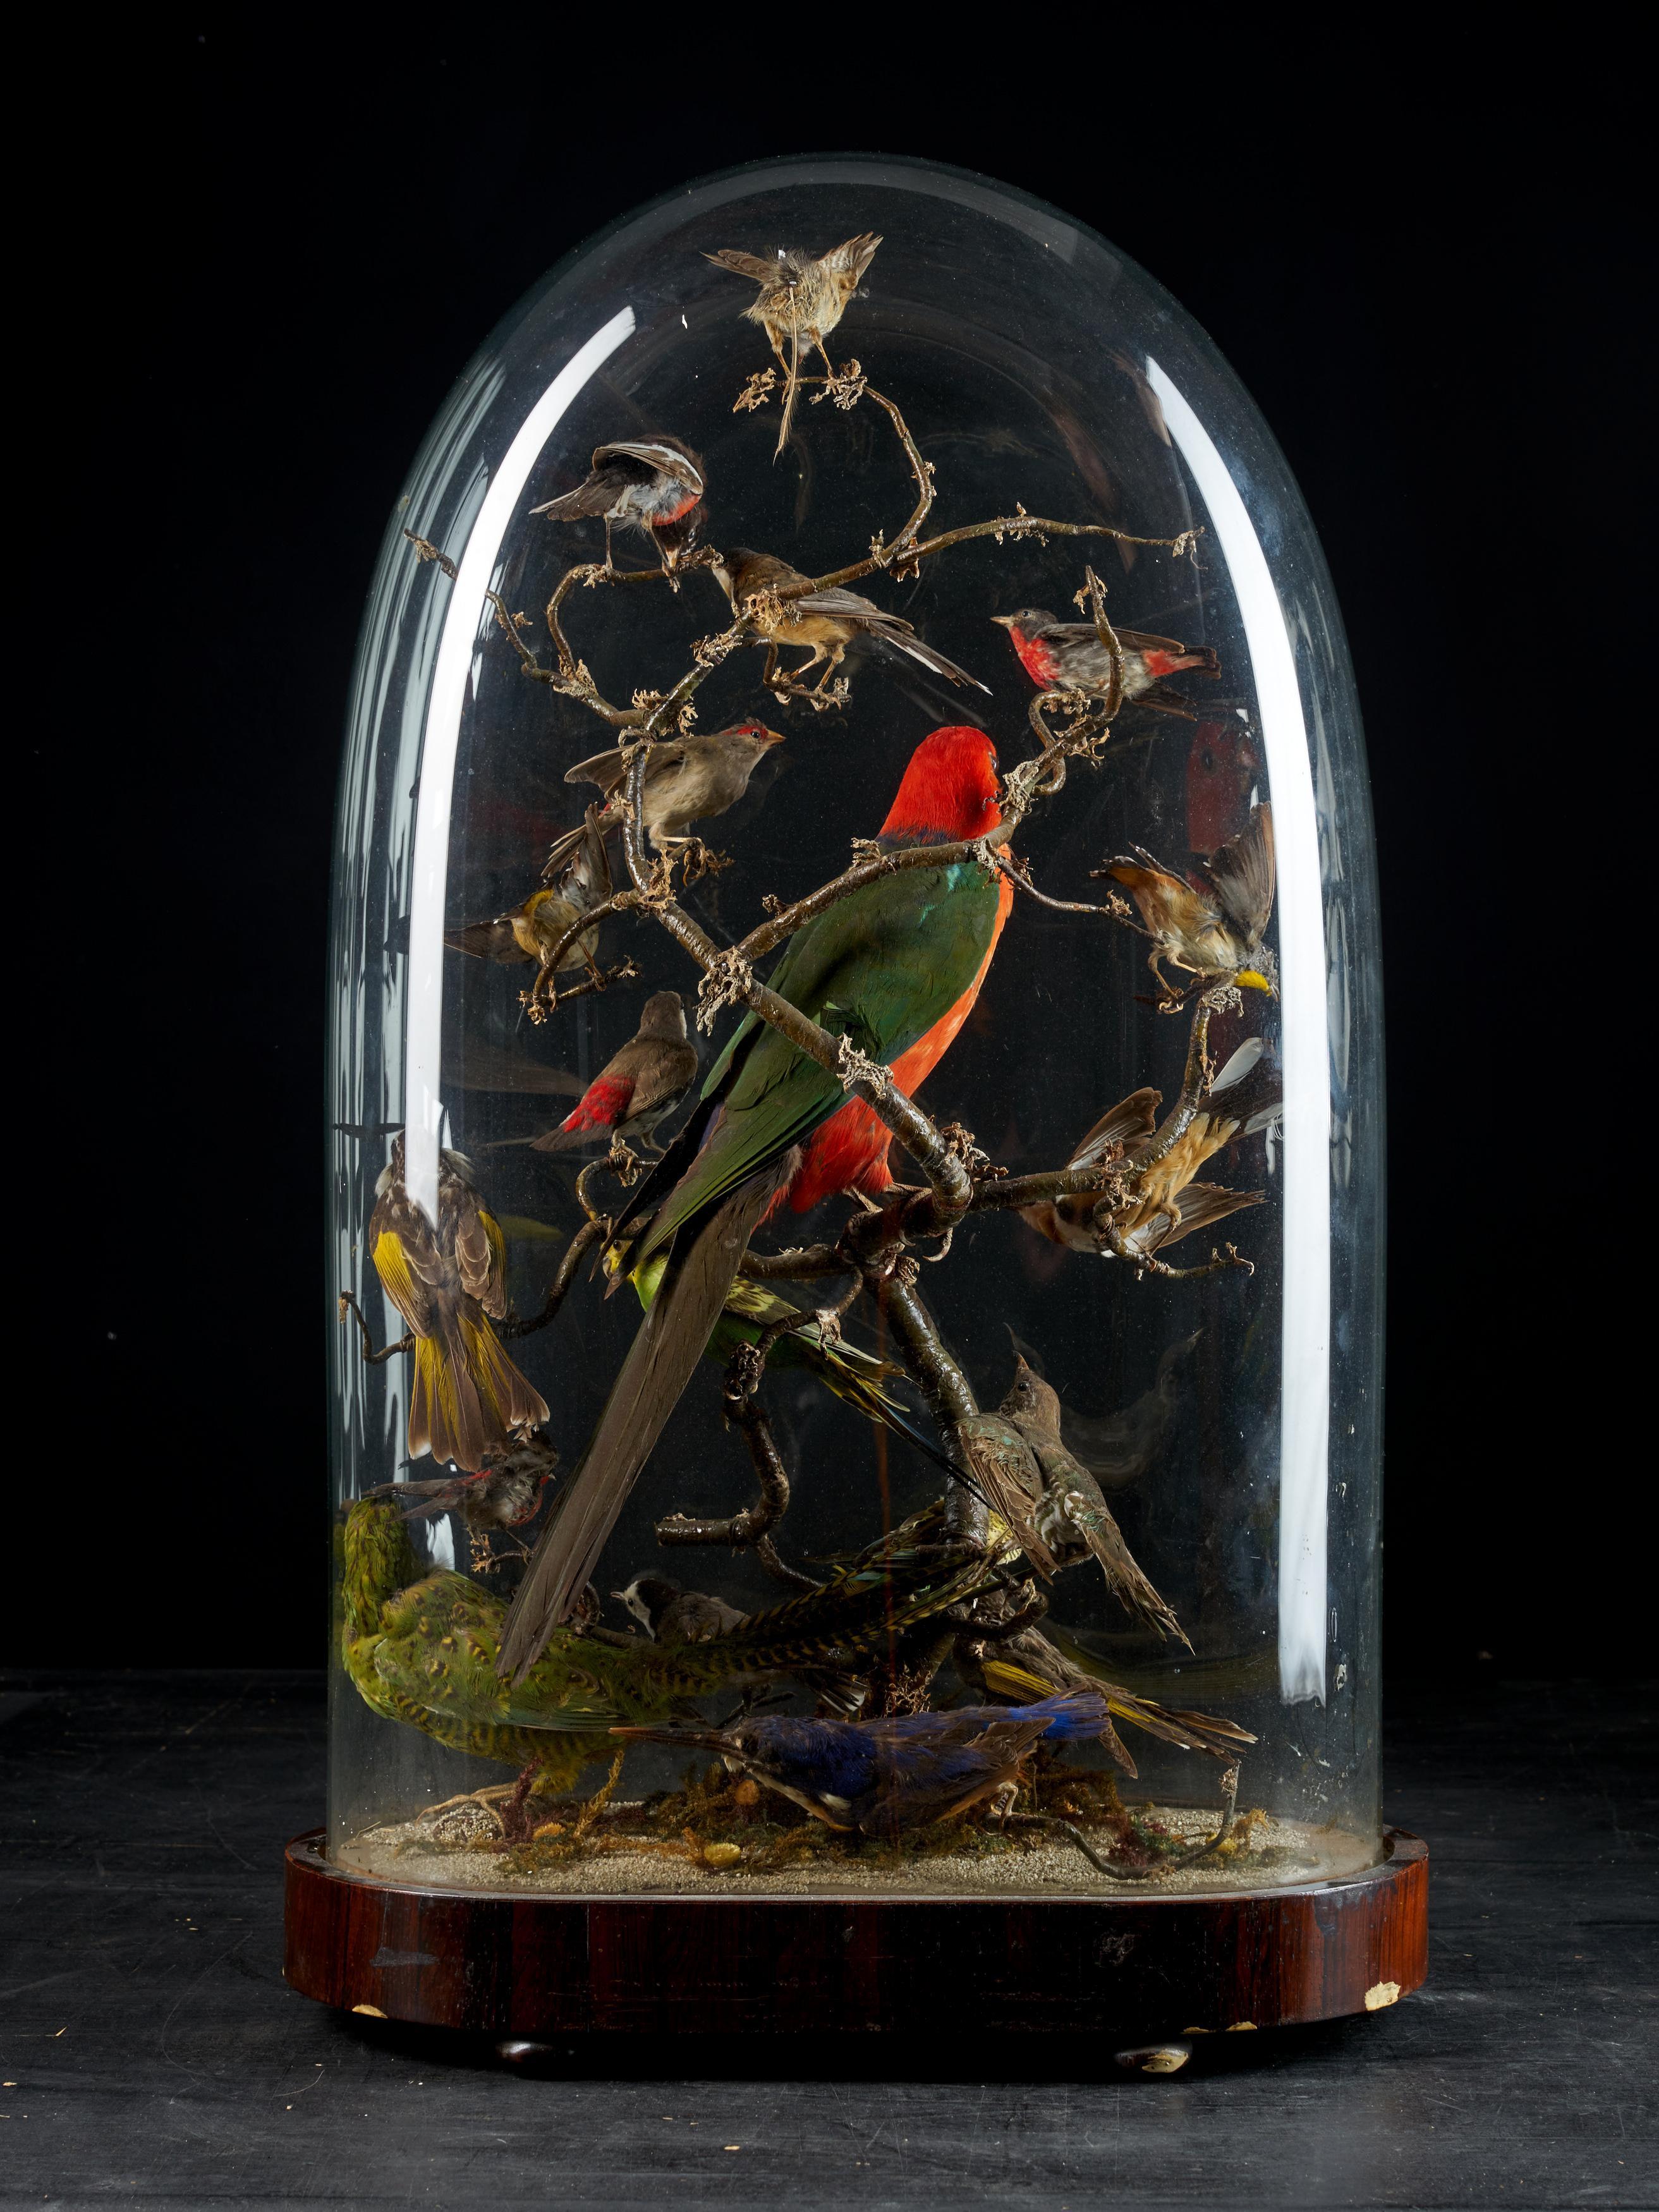 A composition of nineteen exotic birds in a naturalistic setting under a Victorian glass dome. The bird in the center is a male Australian King Parrot, recognizable by its red feather on the head and body and green ones of his wings. Other birds